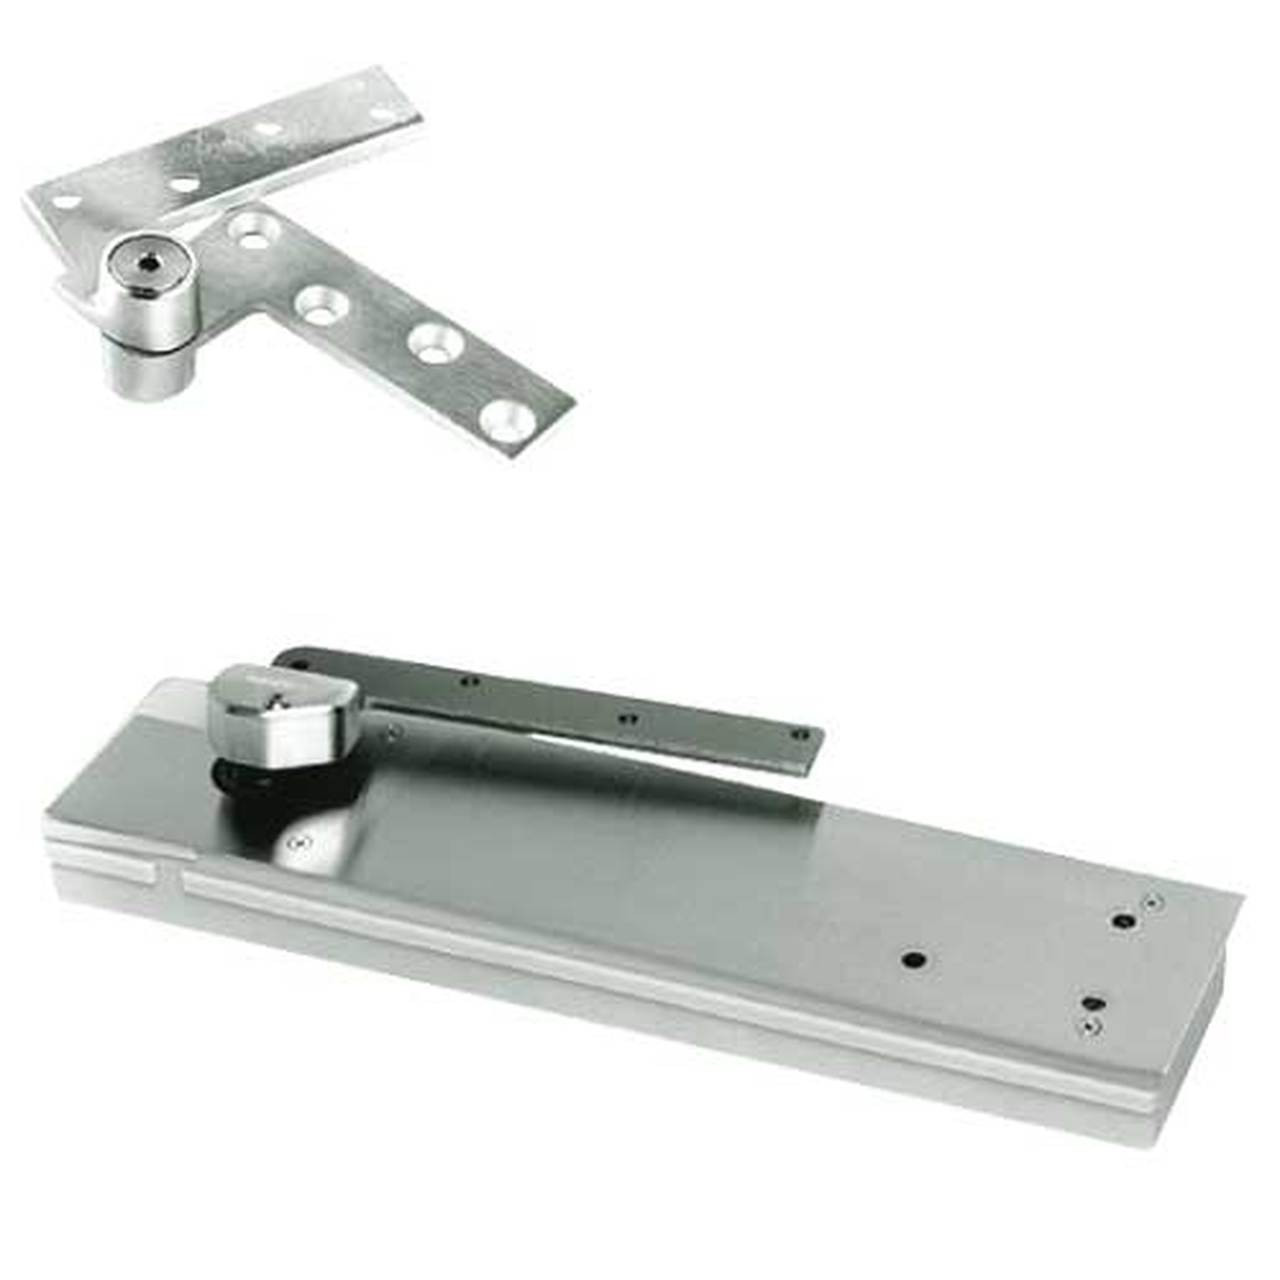 FHM5104NBC-LFP-LH-618 Rixson HM51 Series 3/4" Offset Hung Shallow Depth Floor Closers in Bright Nickel Finish